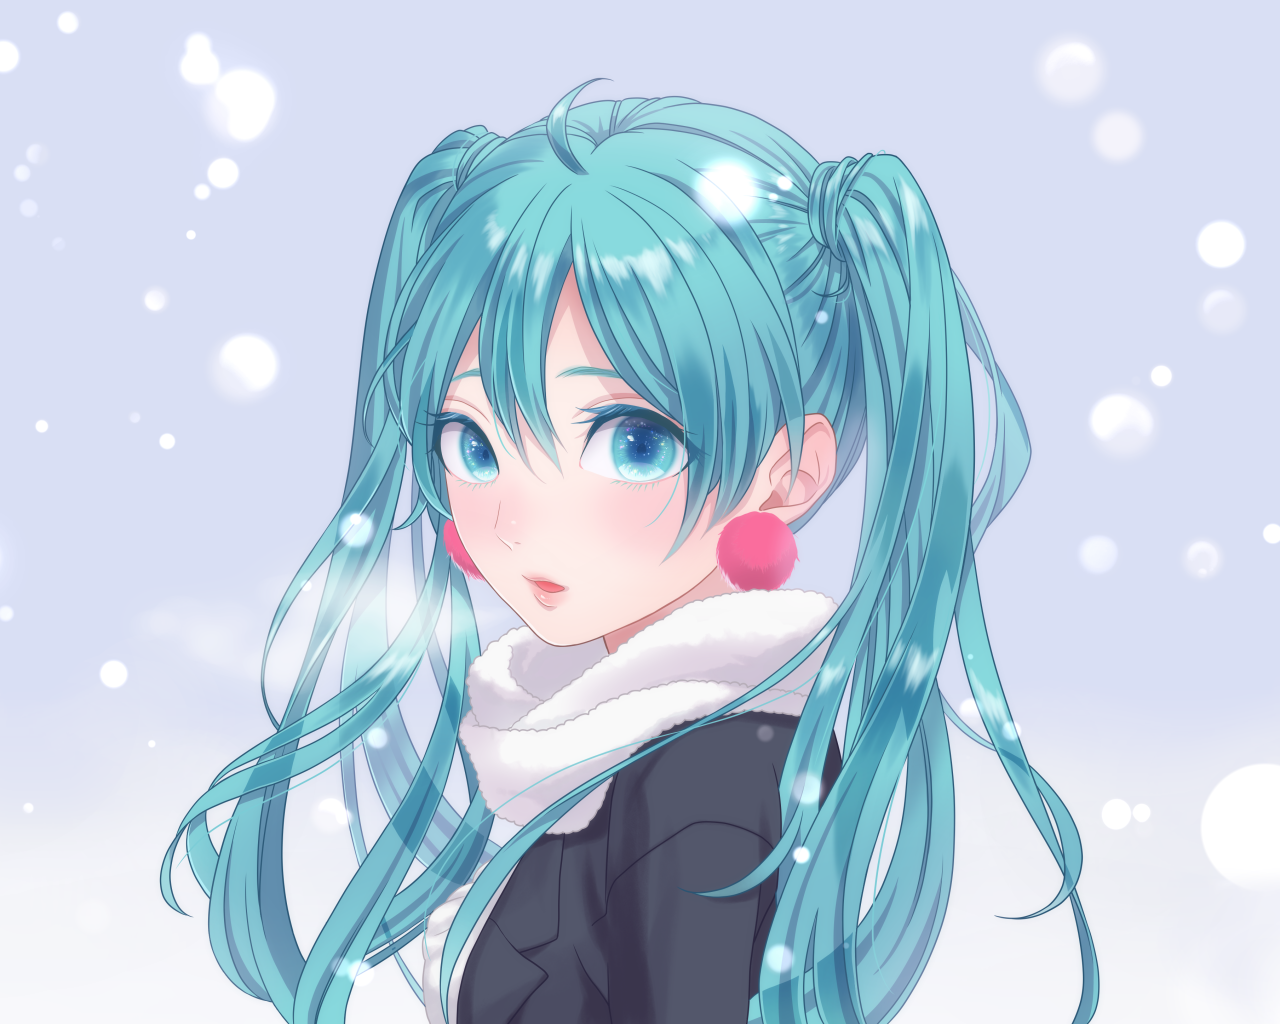 Miku Hatsune anime girl with blue hair in winter